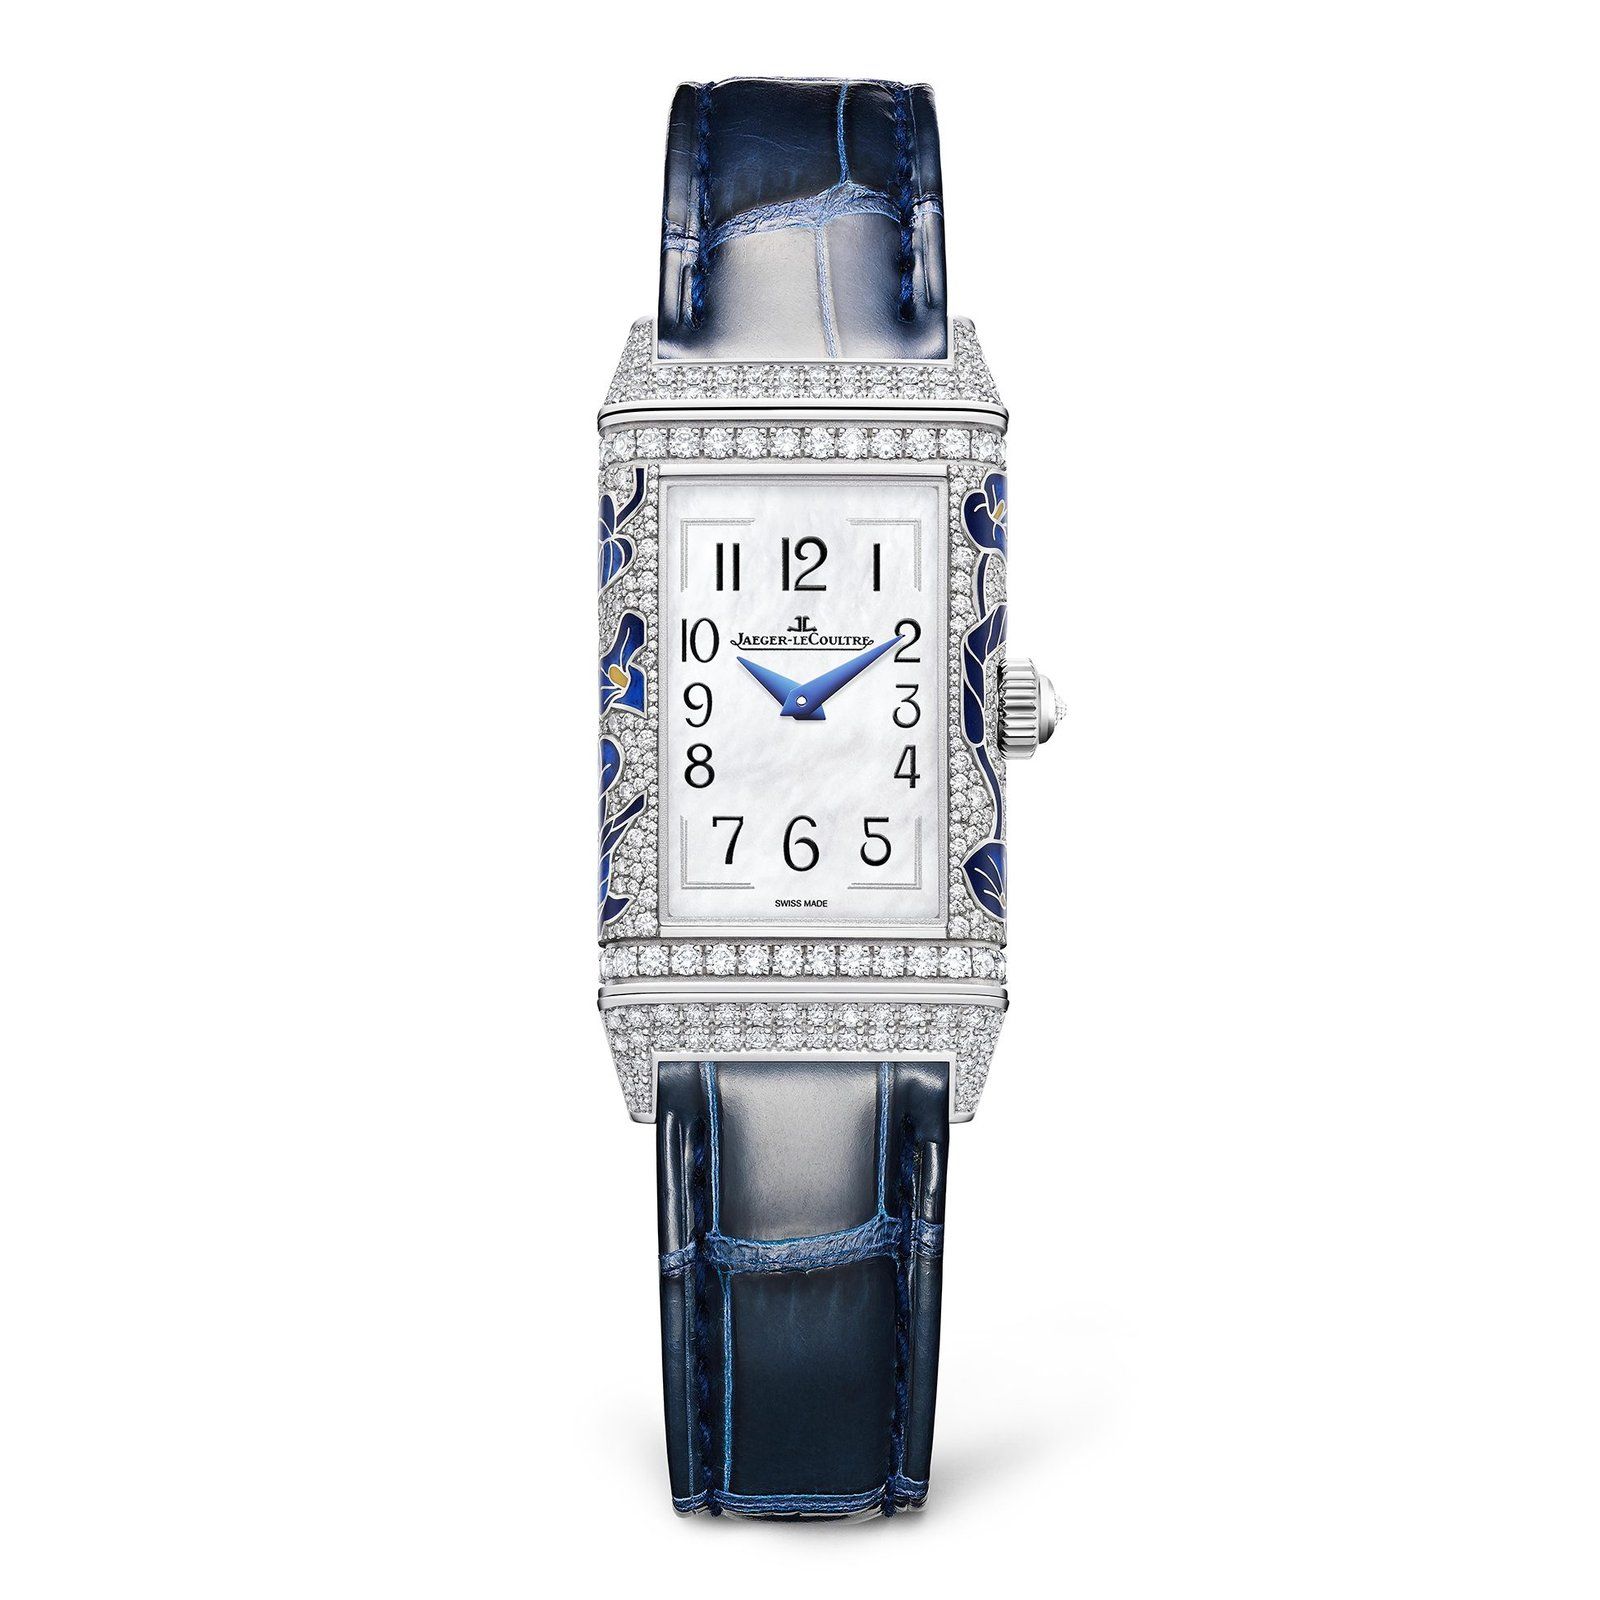 Watches & Wonders 2021 : Jaeger-LeCoultre shines the spotlight on Rare Handcrafts with four exceptional Reverso One Timepieces